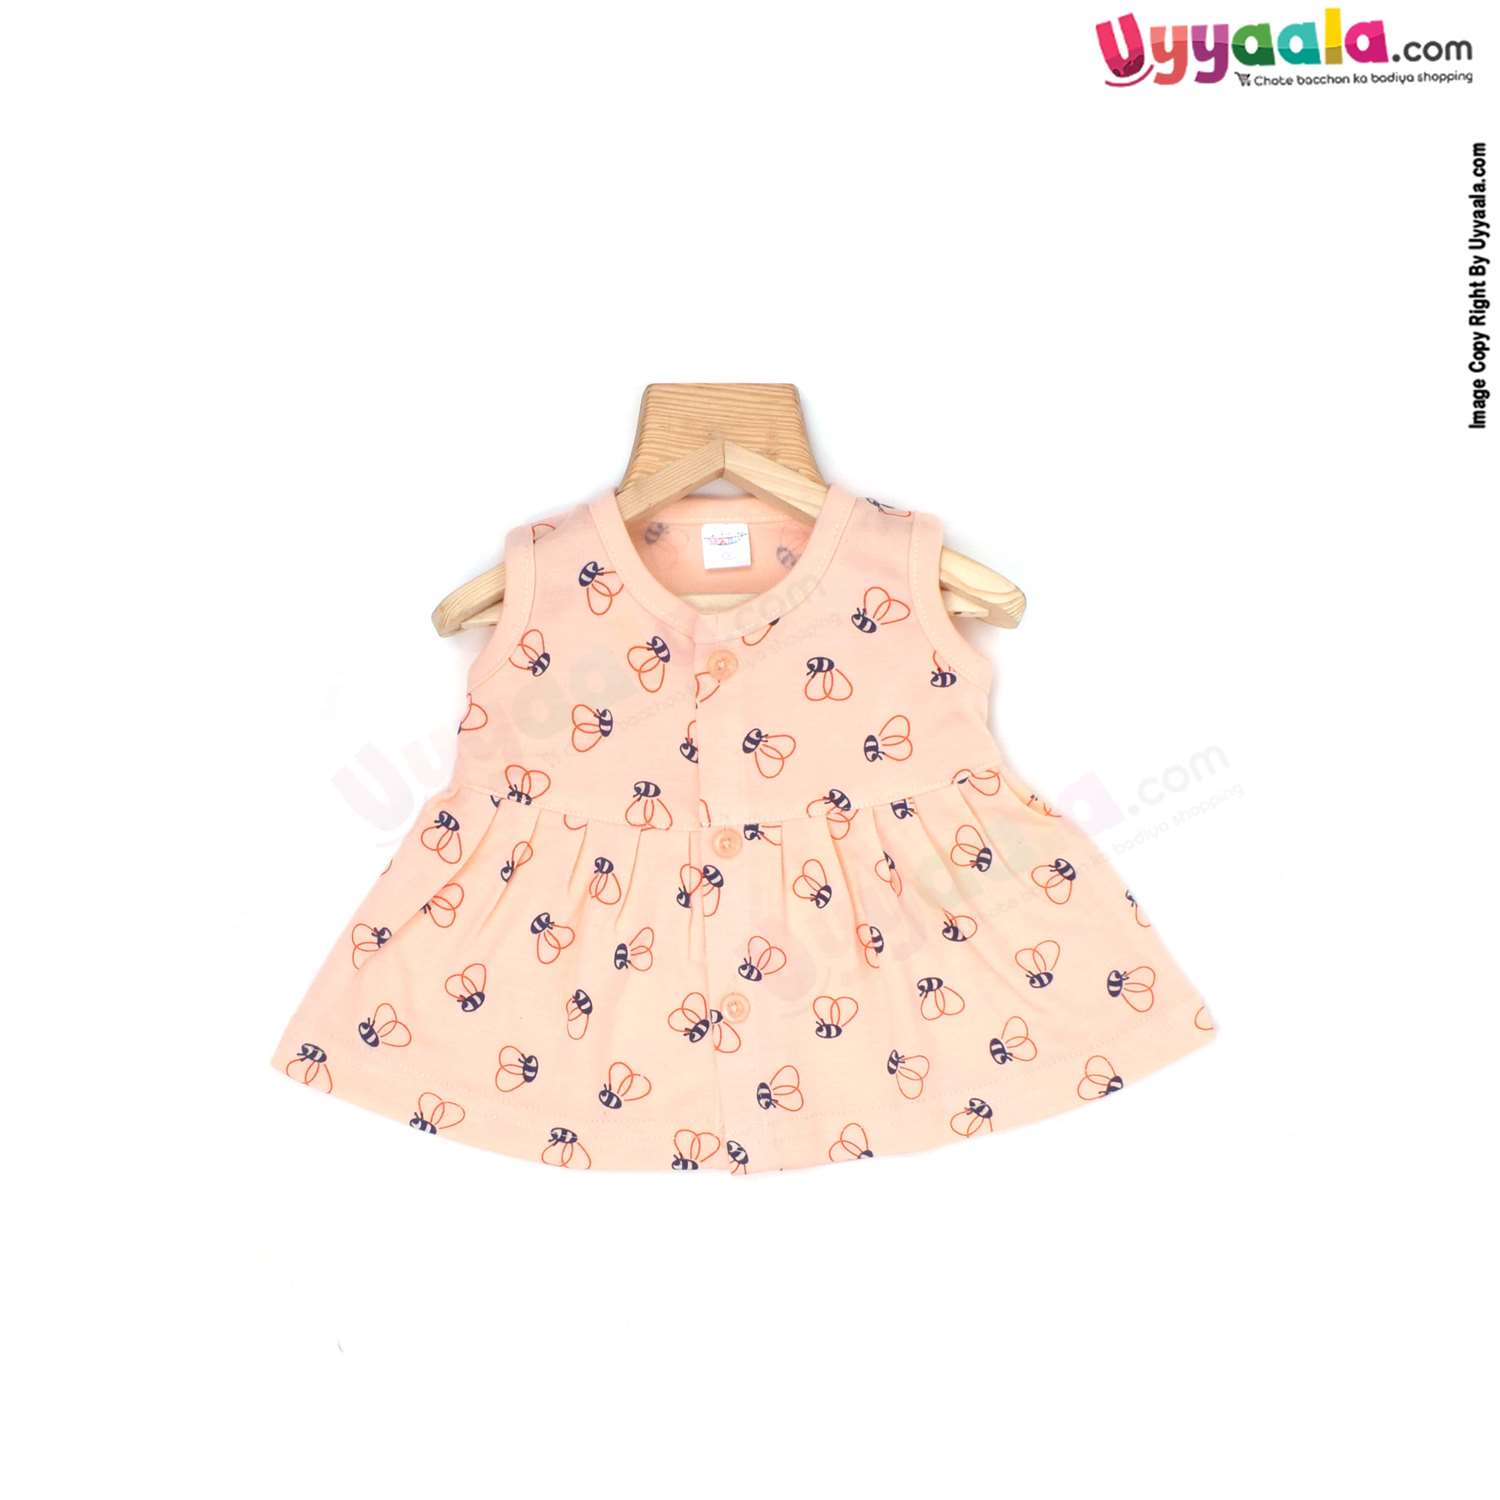 MOMMAS Sleeveless Newborn Baby Frock, Front Opening Button Model, Premium Quality Cotton Baby Wear, (0-3M)